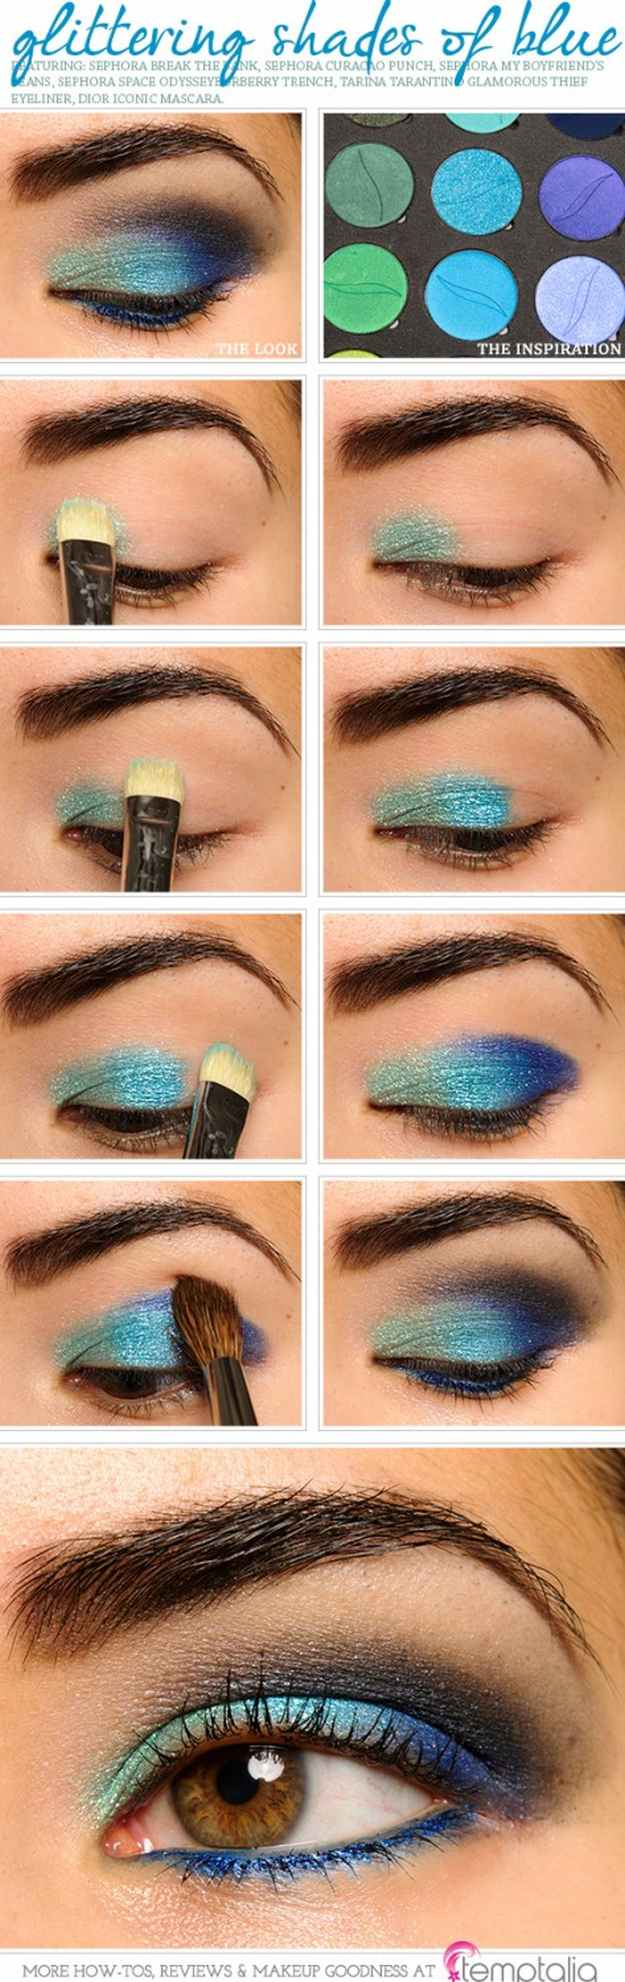 Makeup Tutorial For Brown Eyes Gorgeous Easy Makeup Tutorials For Brown Eyes Makeup Tutorials